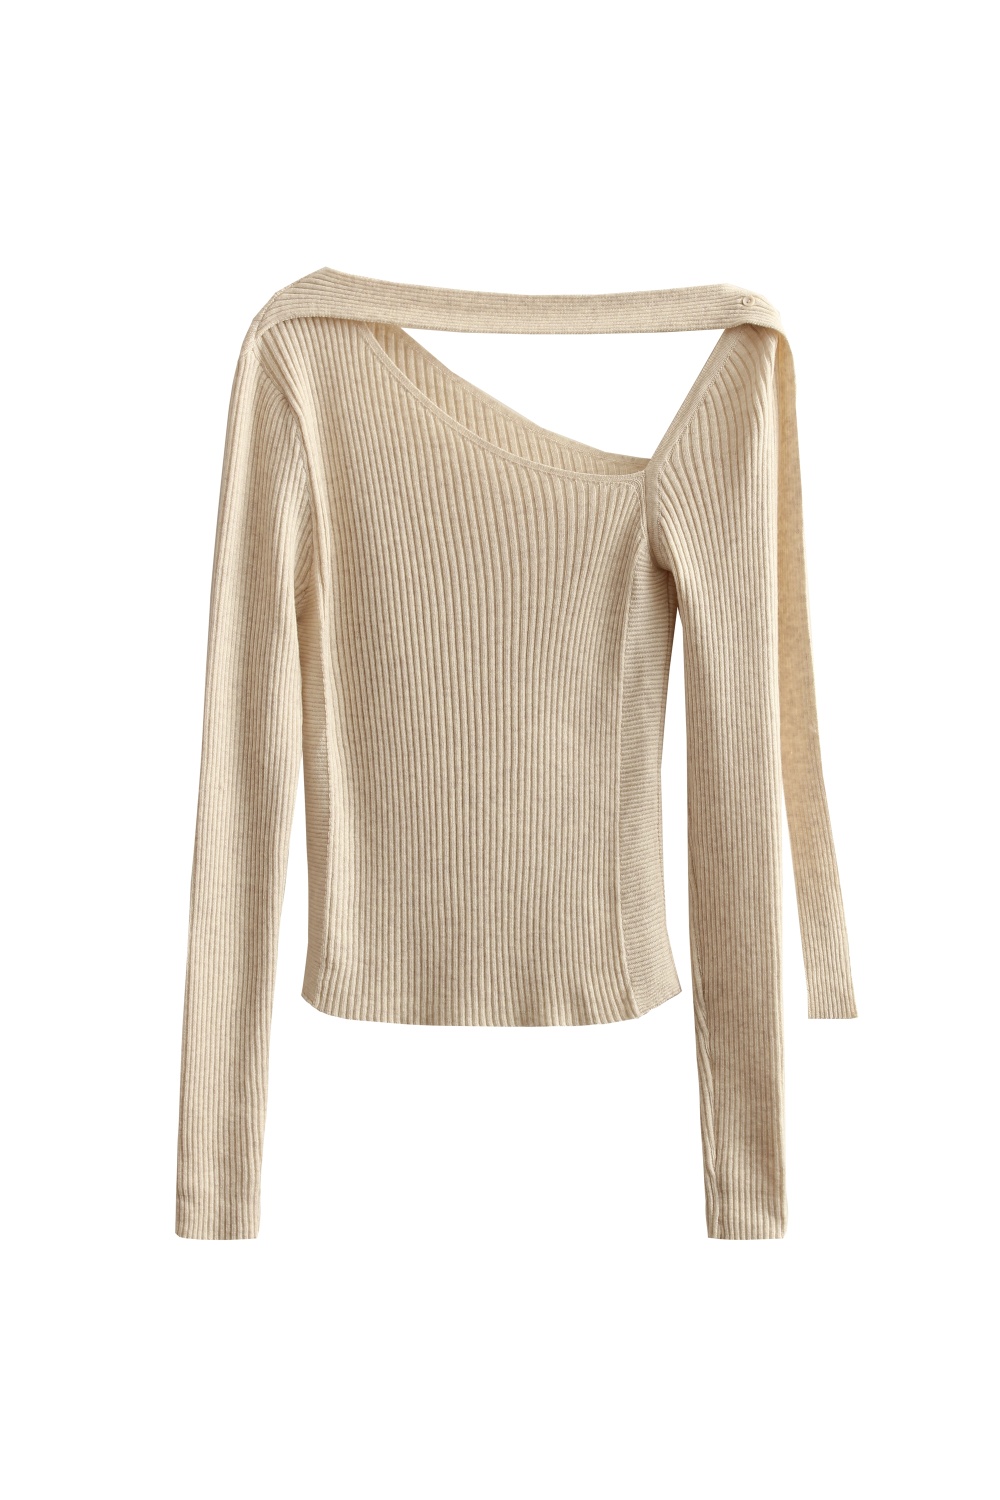 Autumn oblique collar streamer knitted sweater